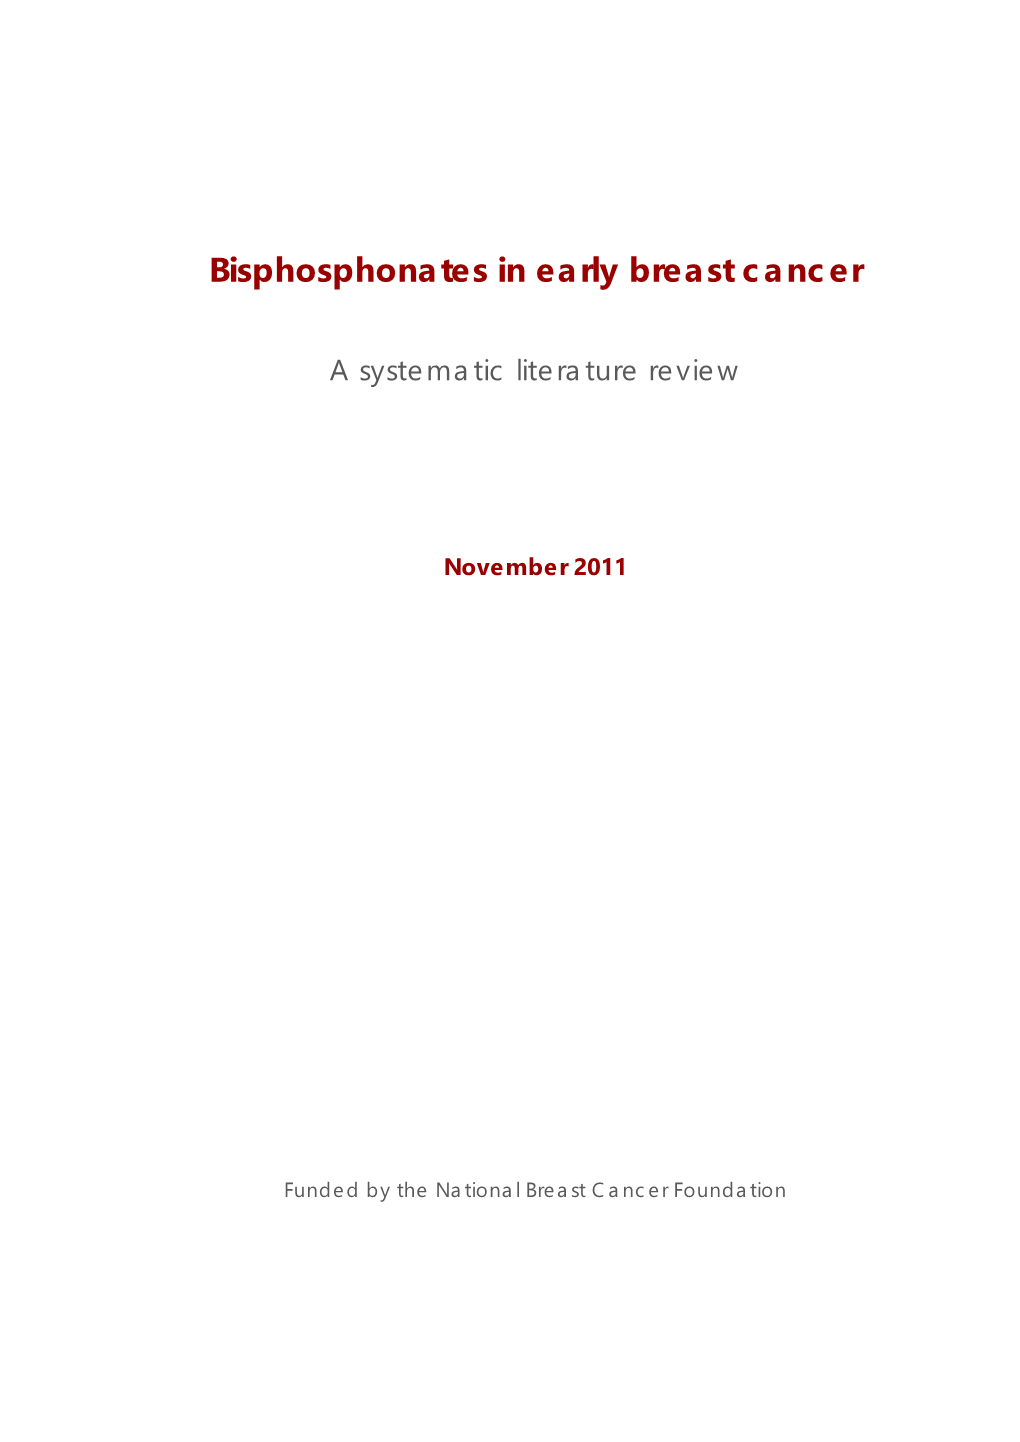 Bisphosphonates in Early Breast Cancer